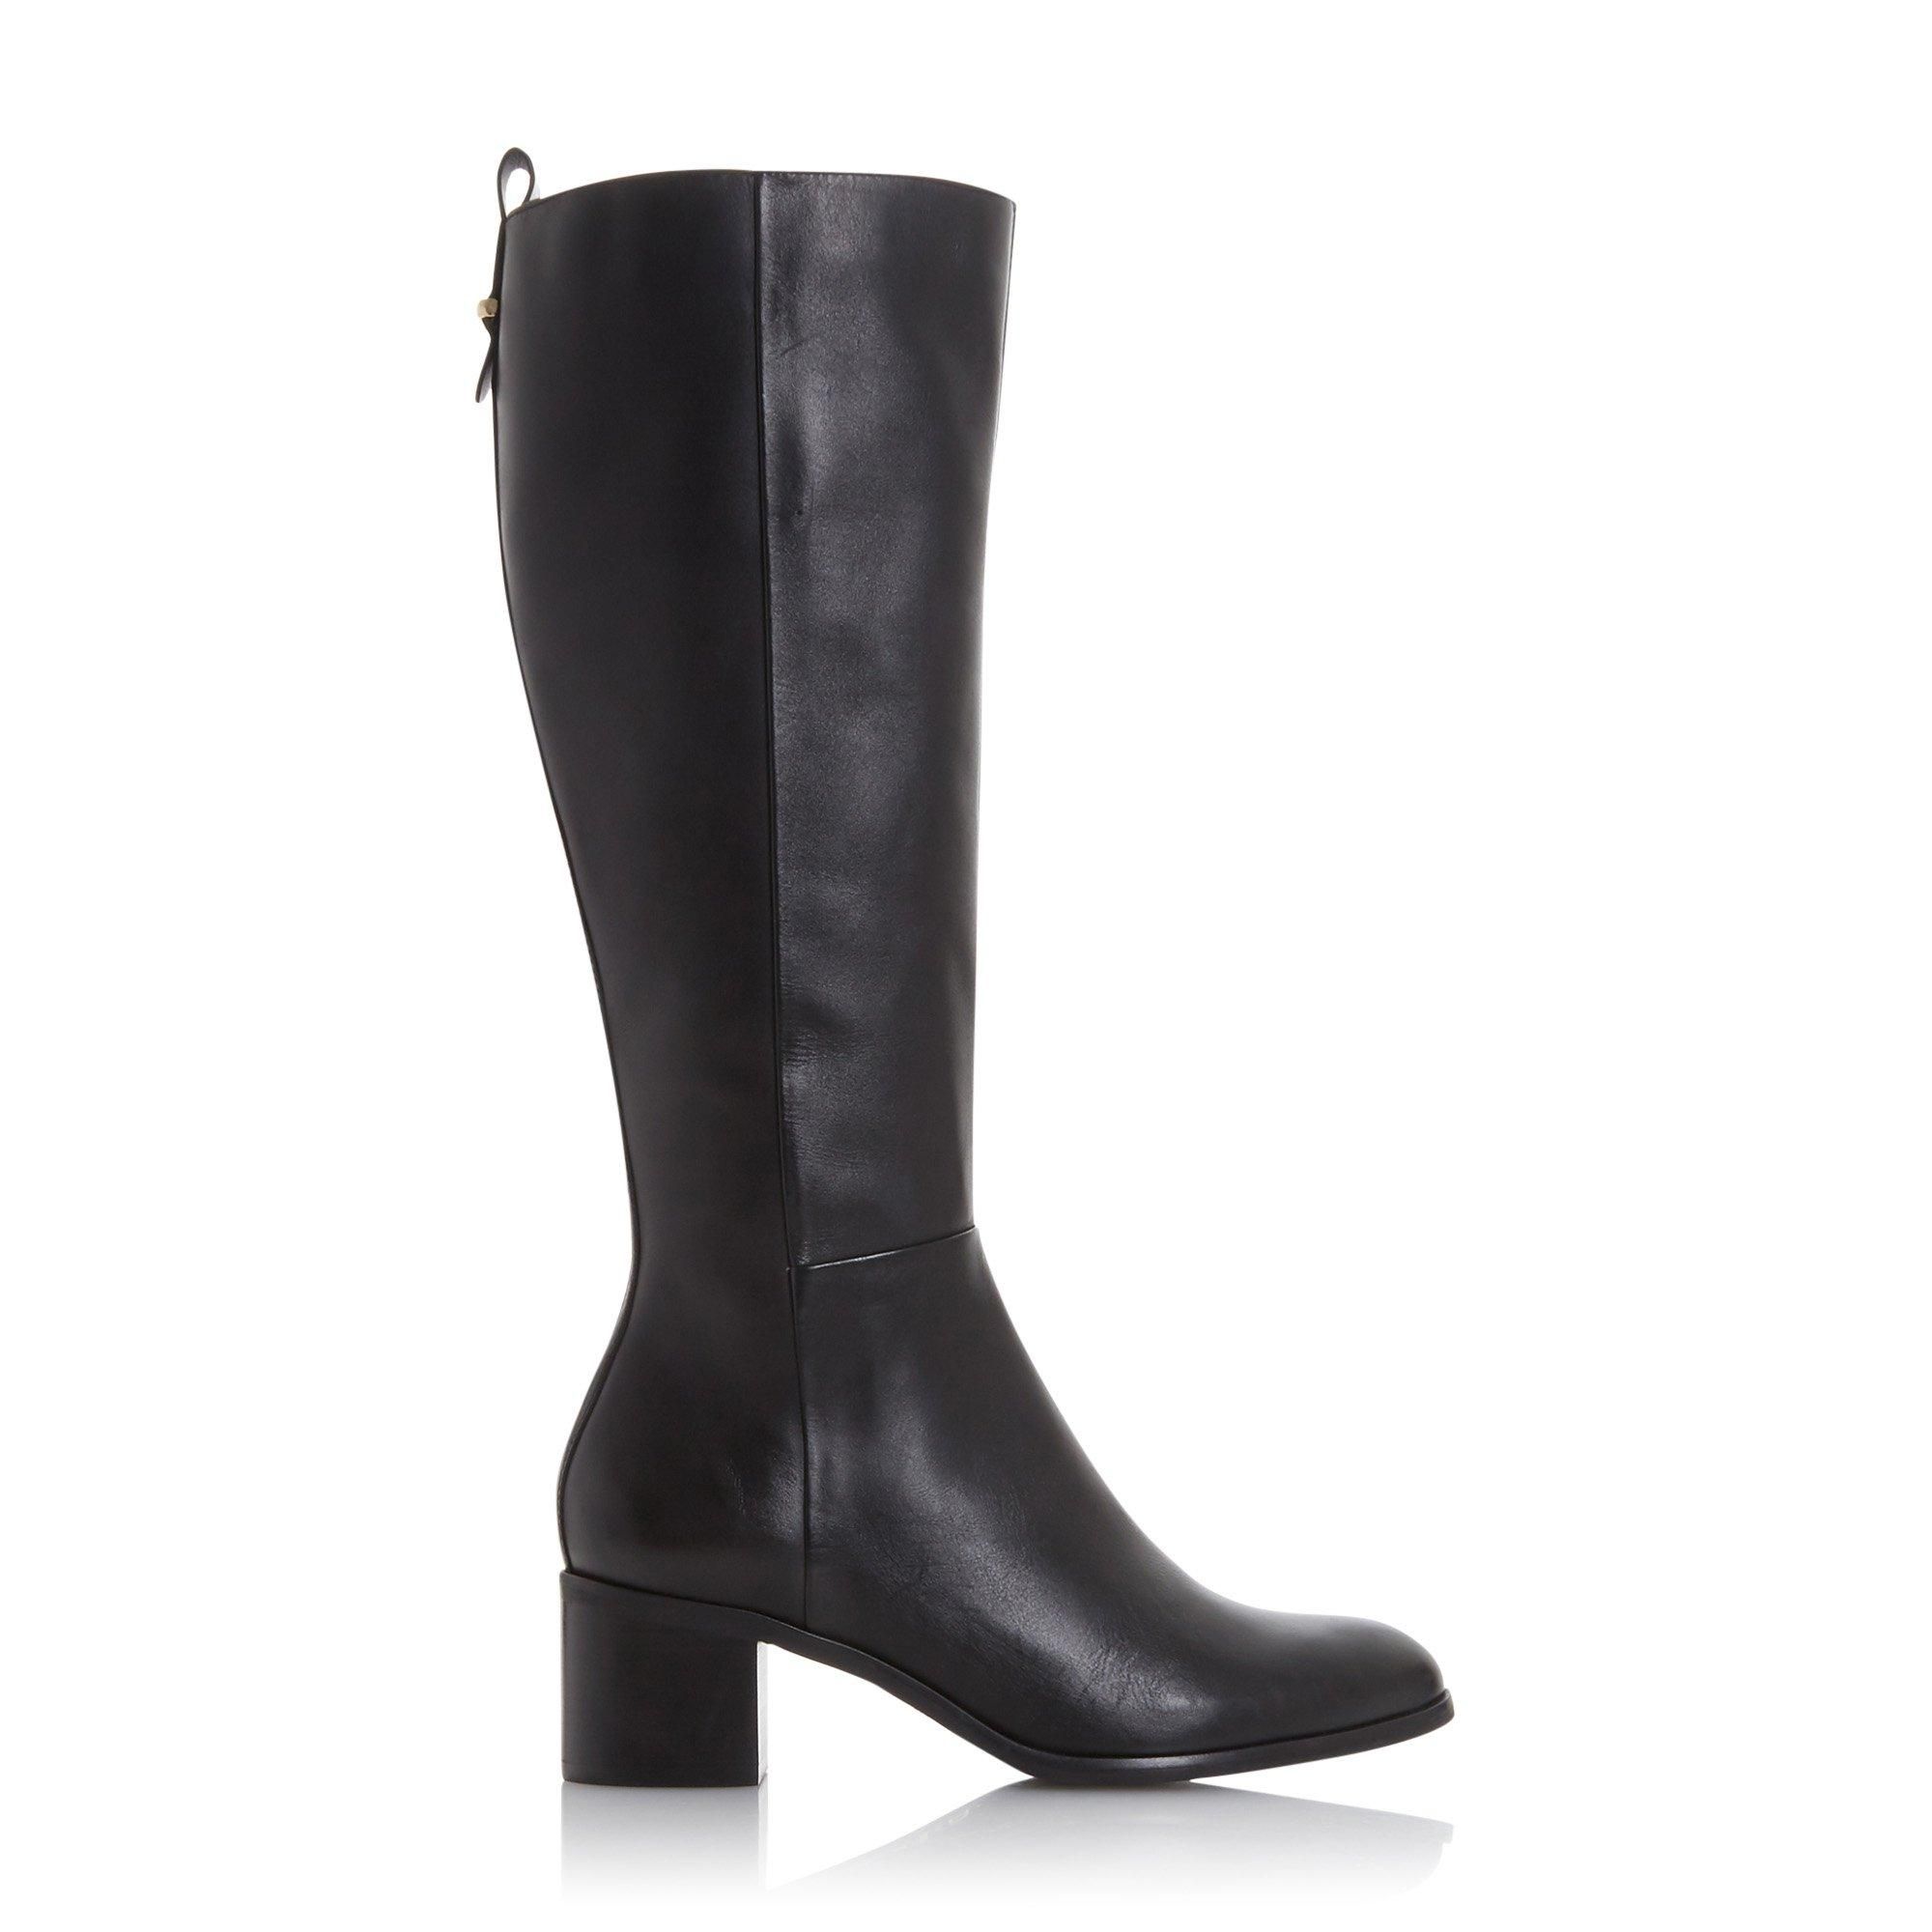 This classic knee-high boot is simple and sophisticated. Featuring an almond toe, side zip fastening and back pull up tab. Complete with a medium block heel.